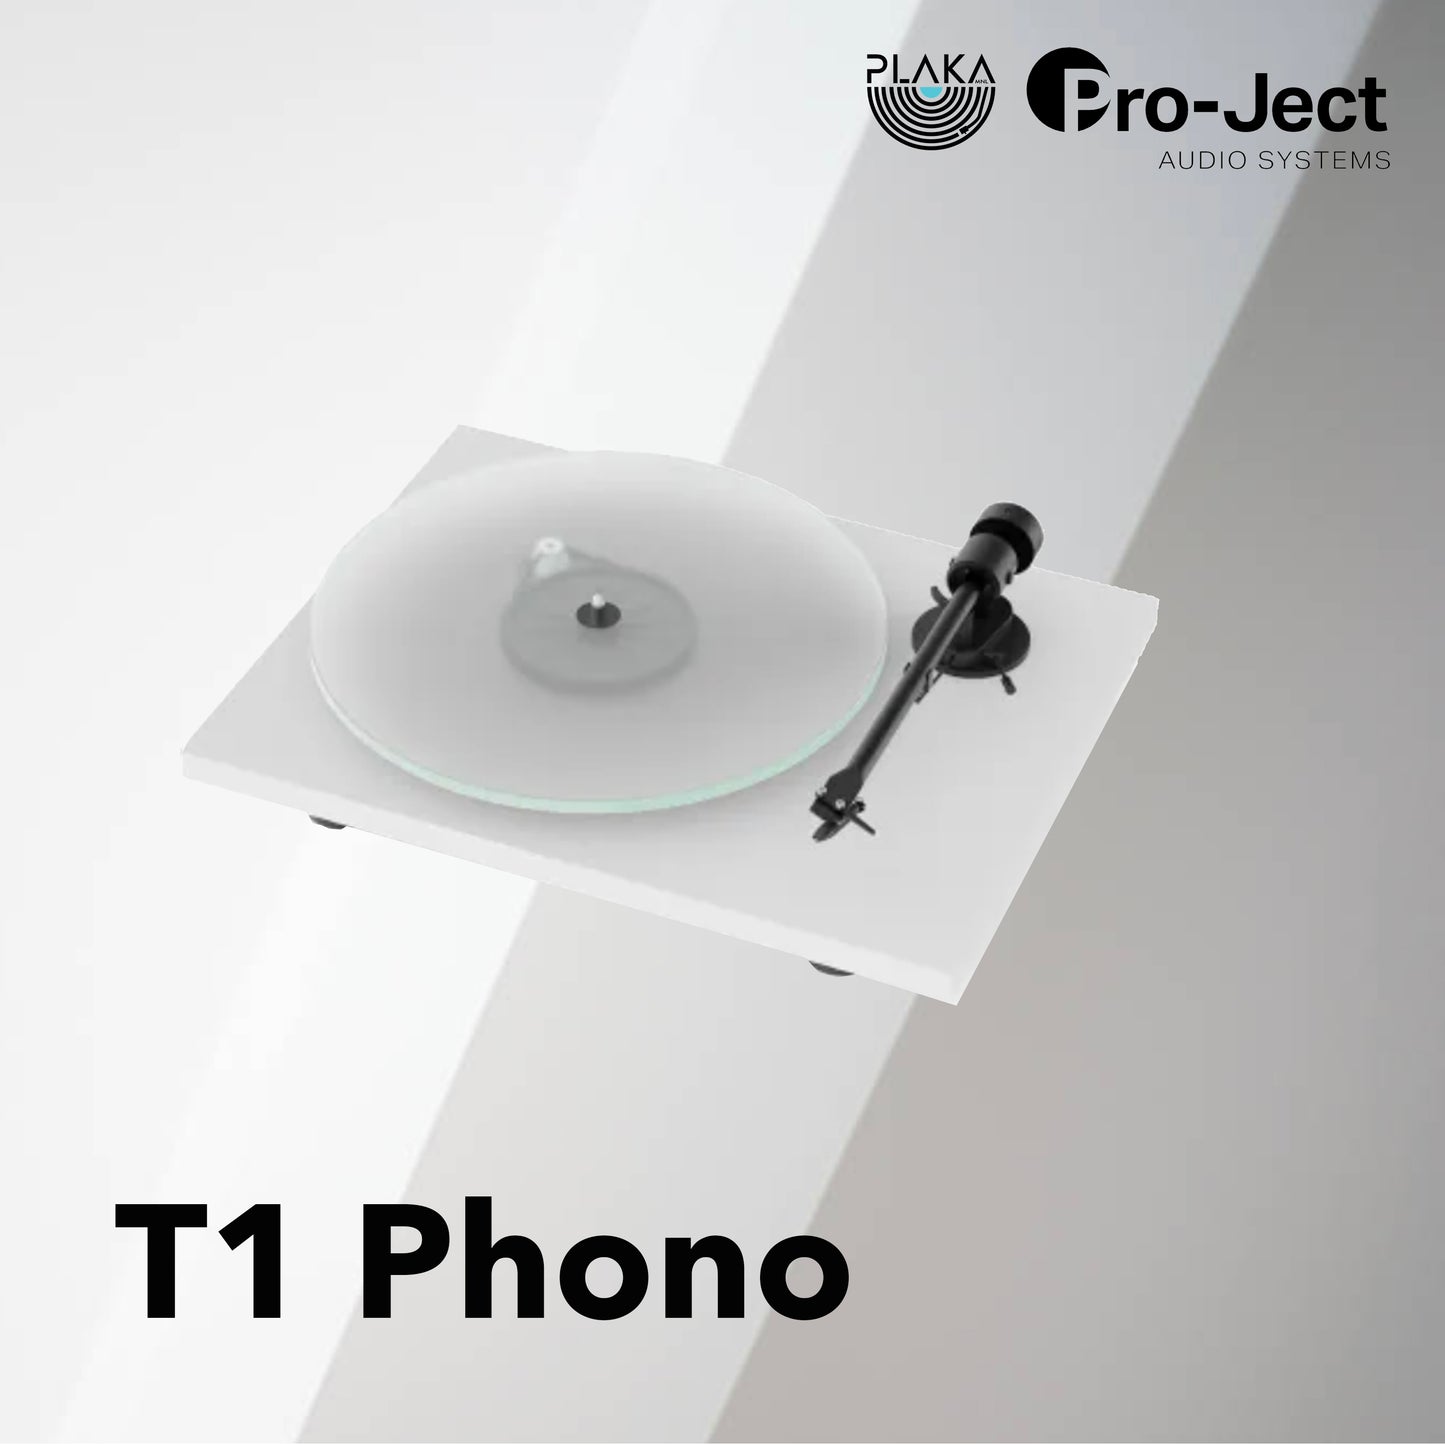 Pro-ject Primary T1 Phono Turntable